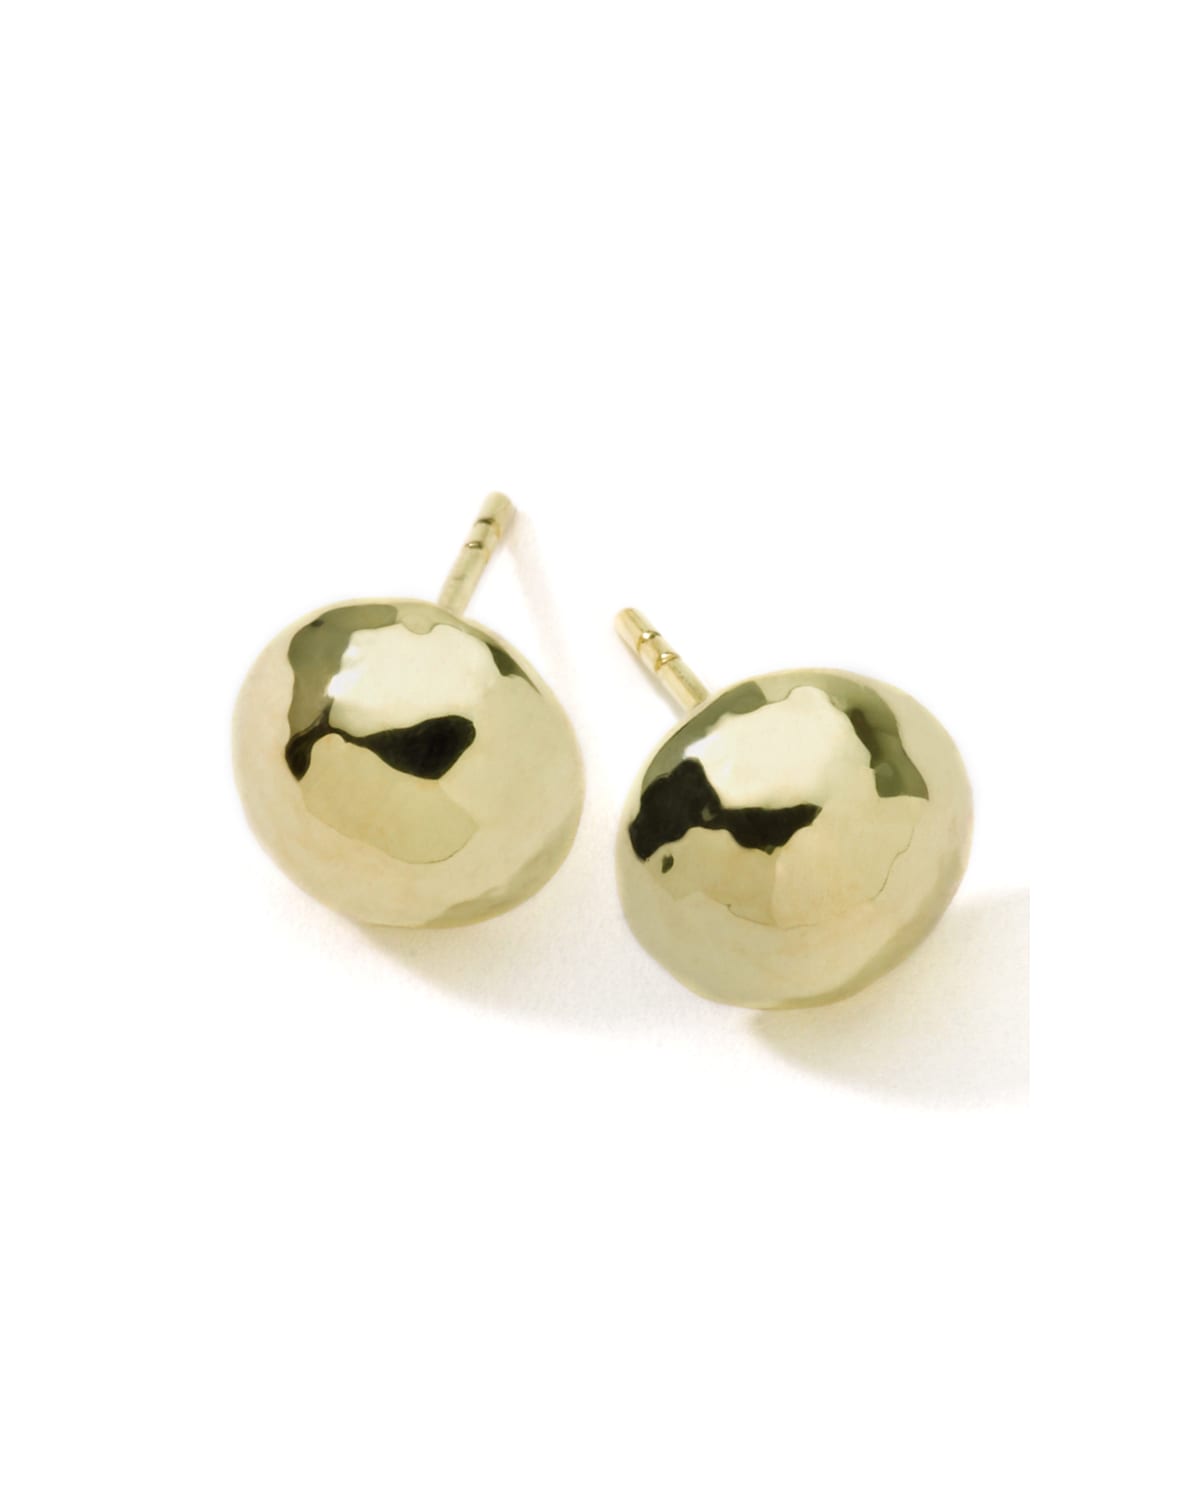 IPPOLITA SMALL HAMMERED PINBALL STUD EARRINGS IN 18K GOLD